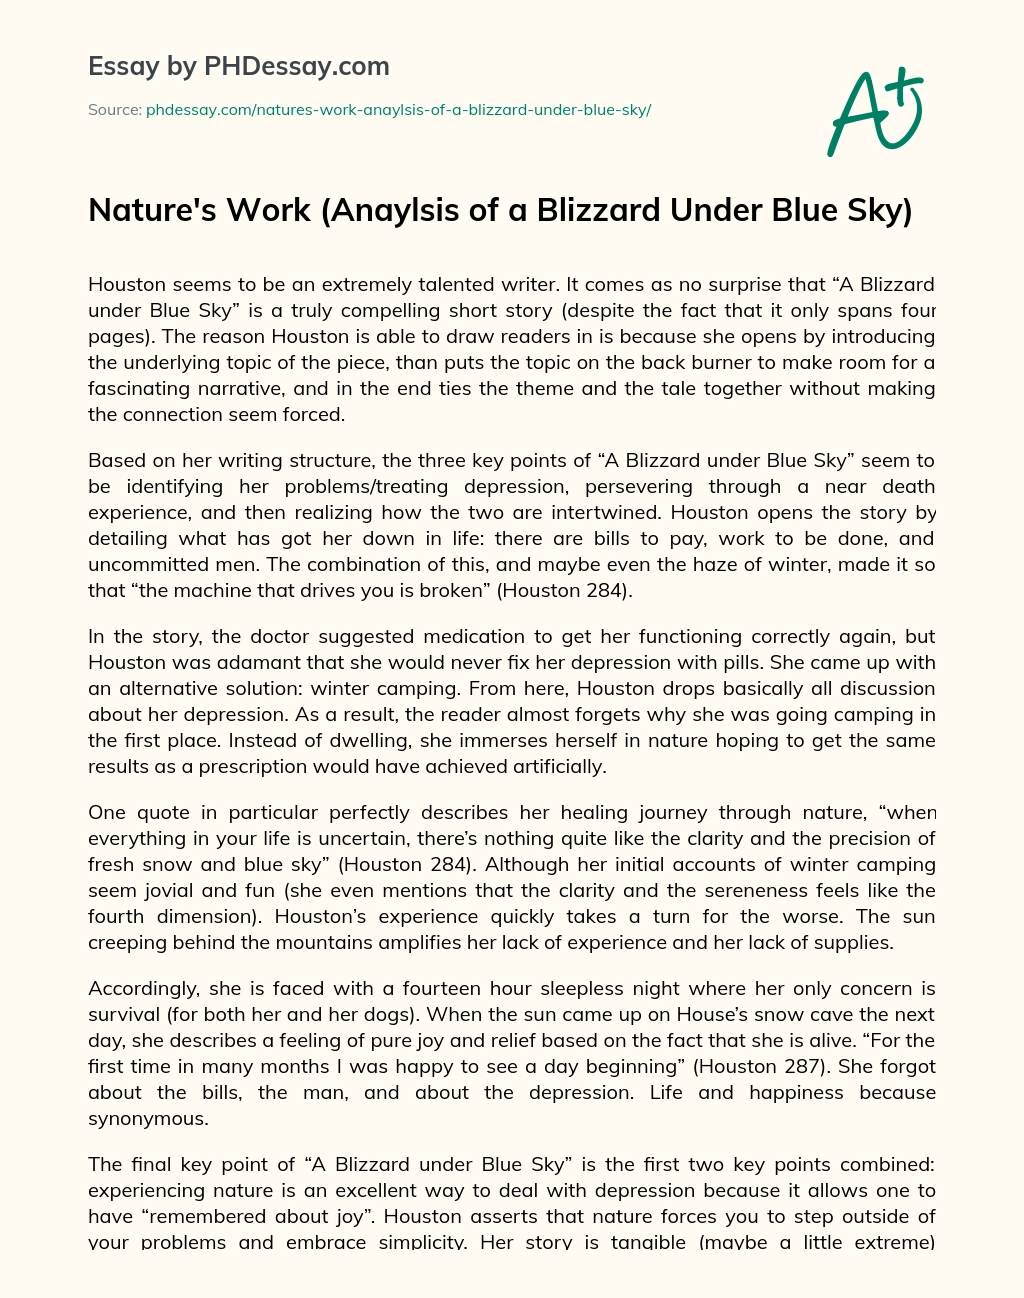 Nature’s Work (Anaylsis of a Blizzard Under Blue Sky) essay